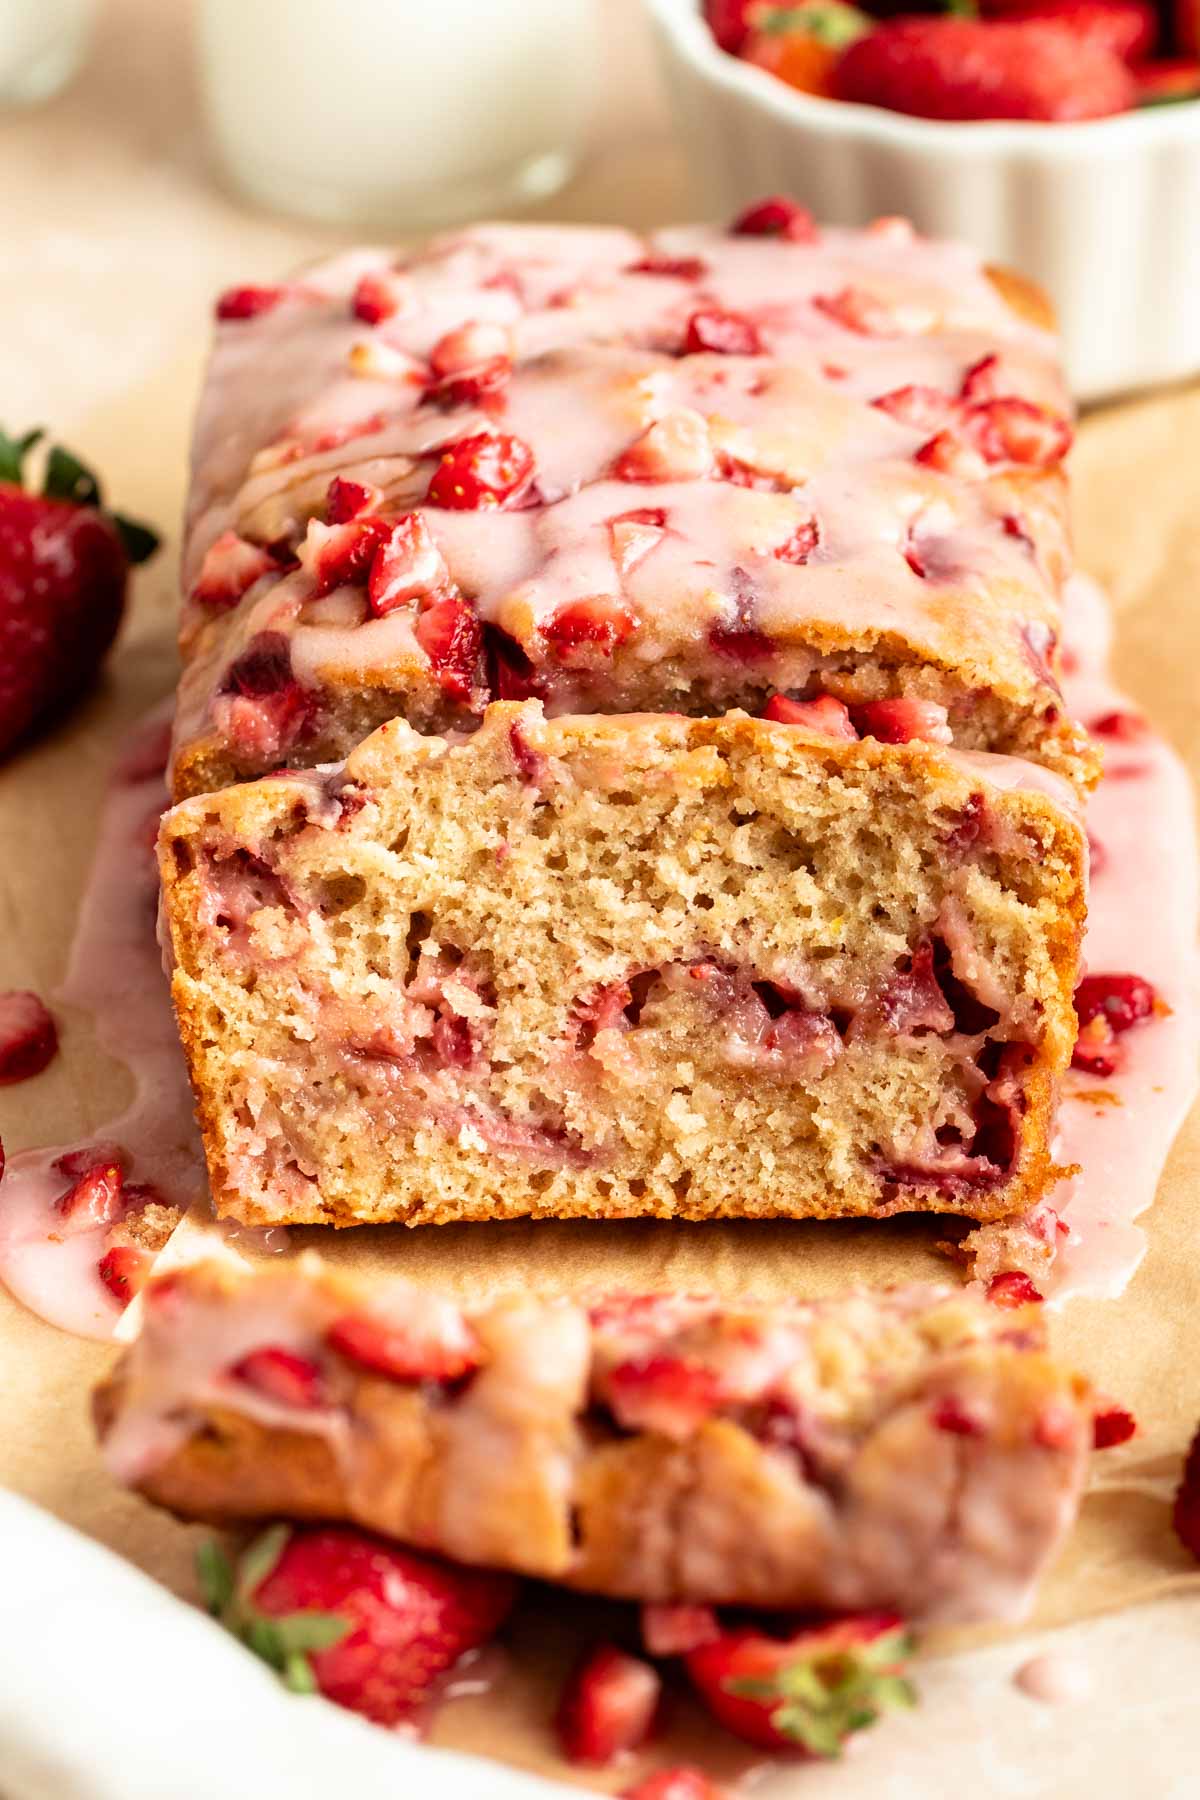 Sliced strawberry bread on a parchment paper.